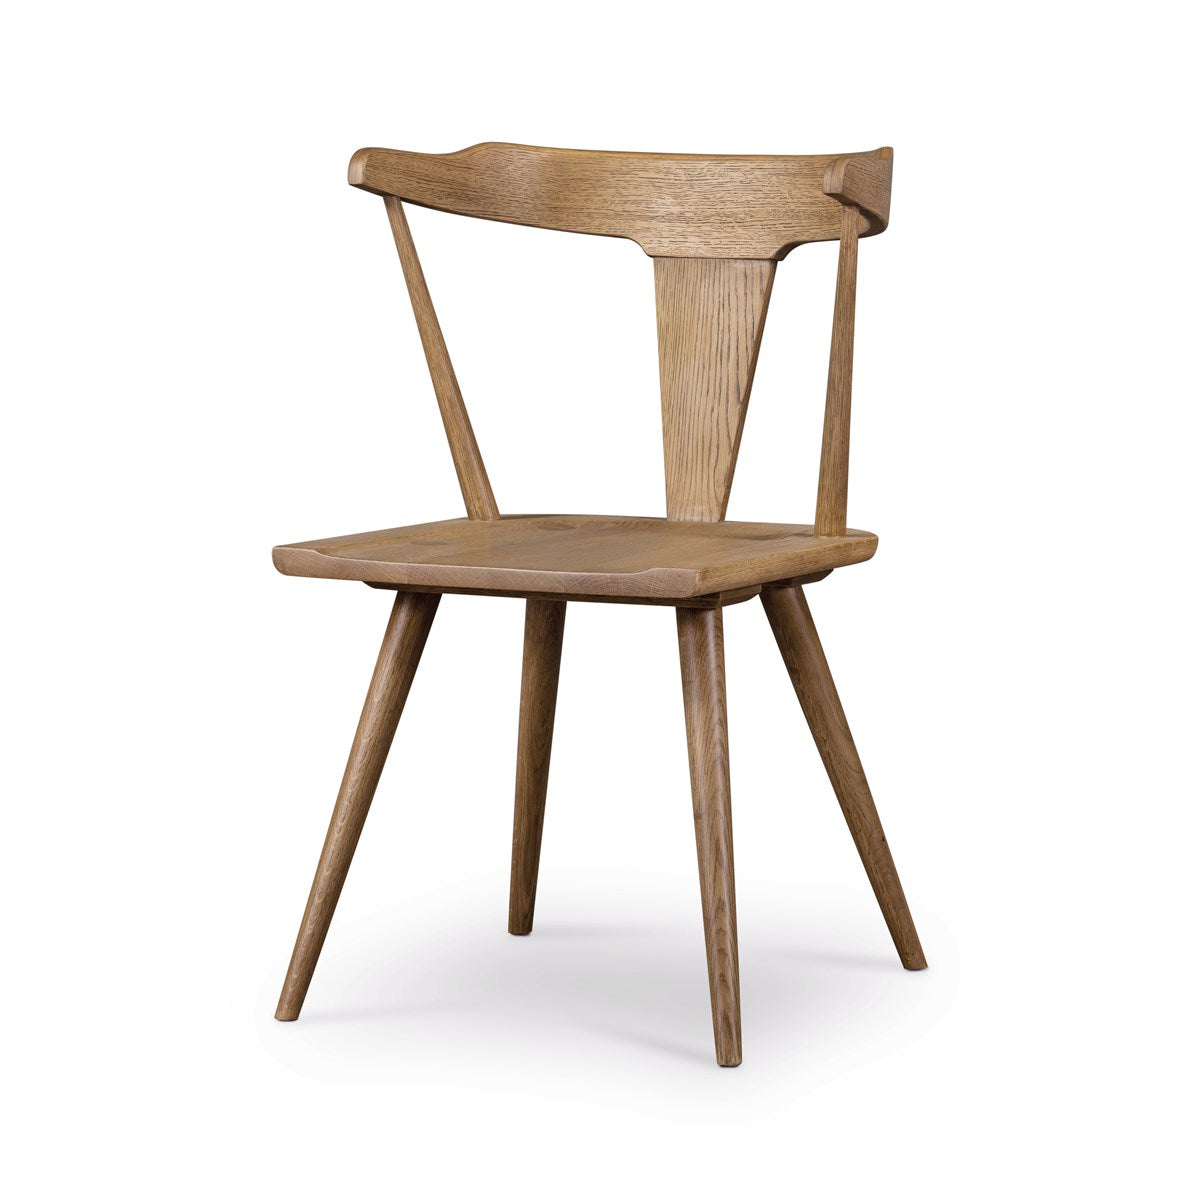 Load image into Gallery viewer, Ripley Dining Chair Sandy OakDinning Chair Four Hands  Sandy Oak   Four Hands, Burke Decor, Mid Century Modern Furniture, Old Bones Furniture Company, Old Bones Co, Modern Mid Century, Designer Furniture, https://www.oldbonesco.com/
